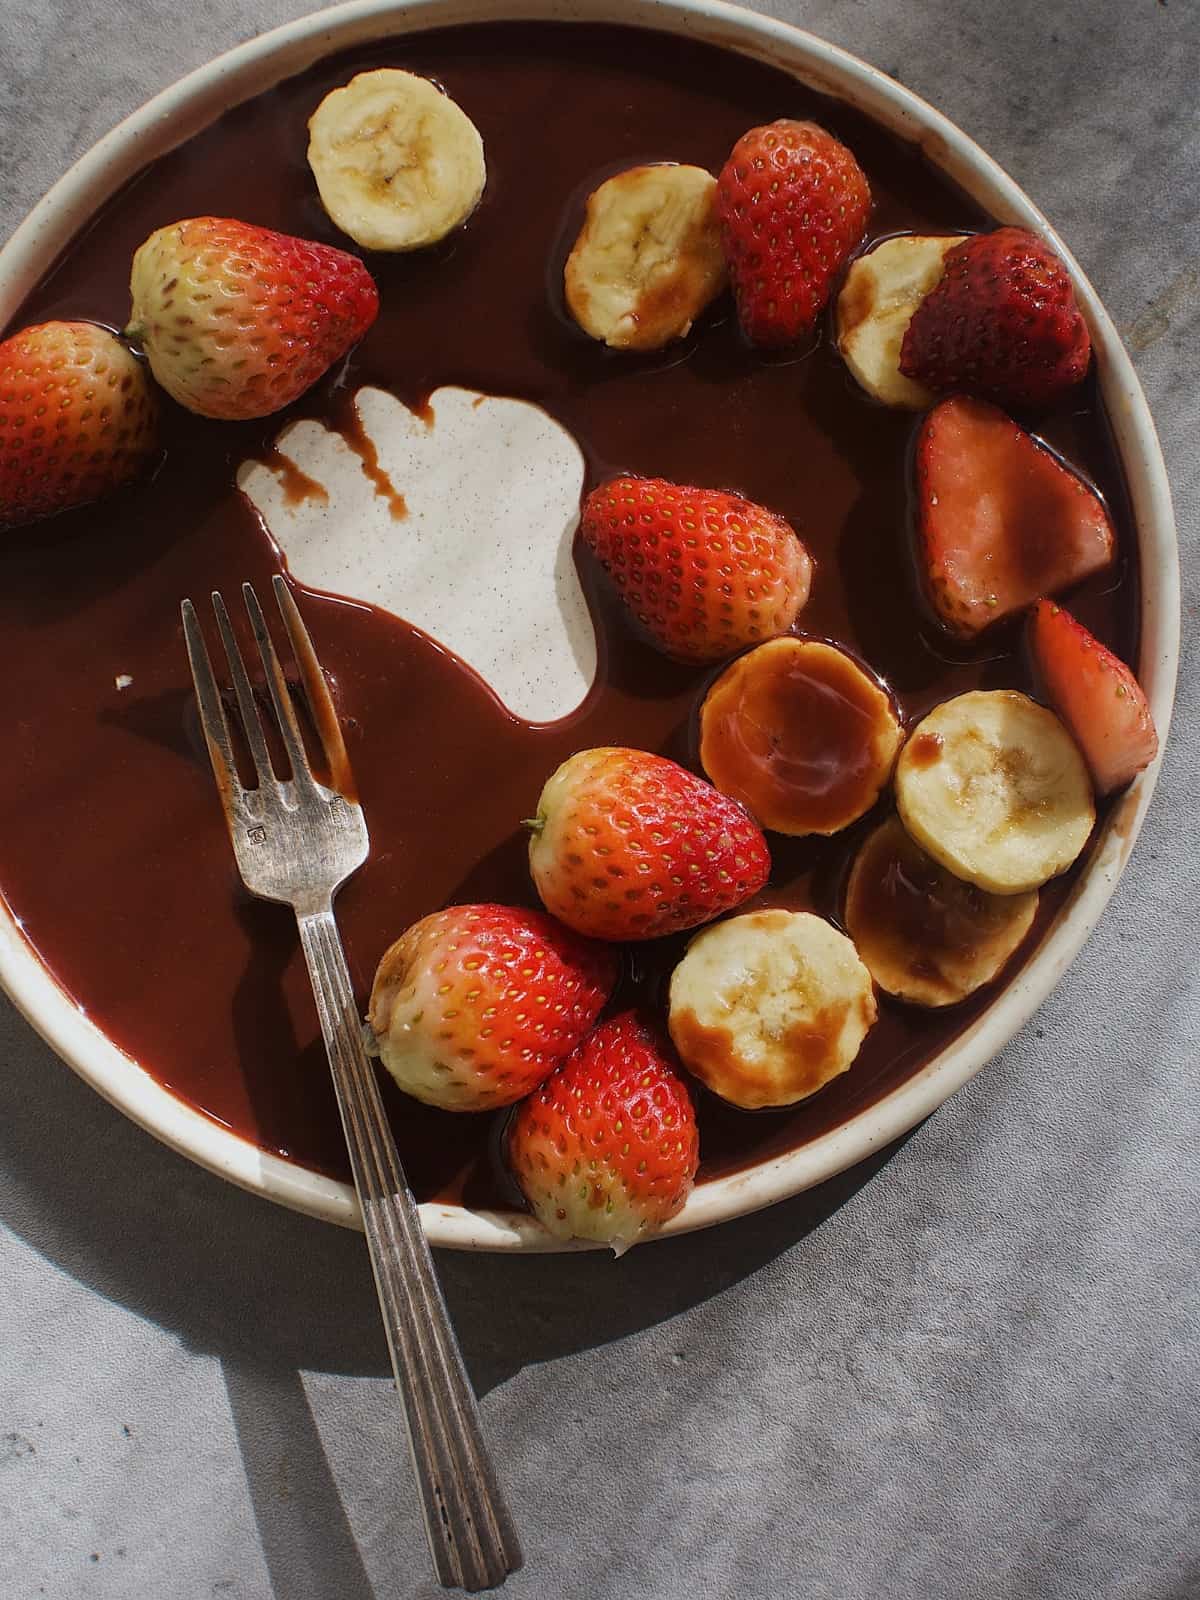 Chocolate syrup on a plate, topped with strawberries and chopped bananas.